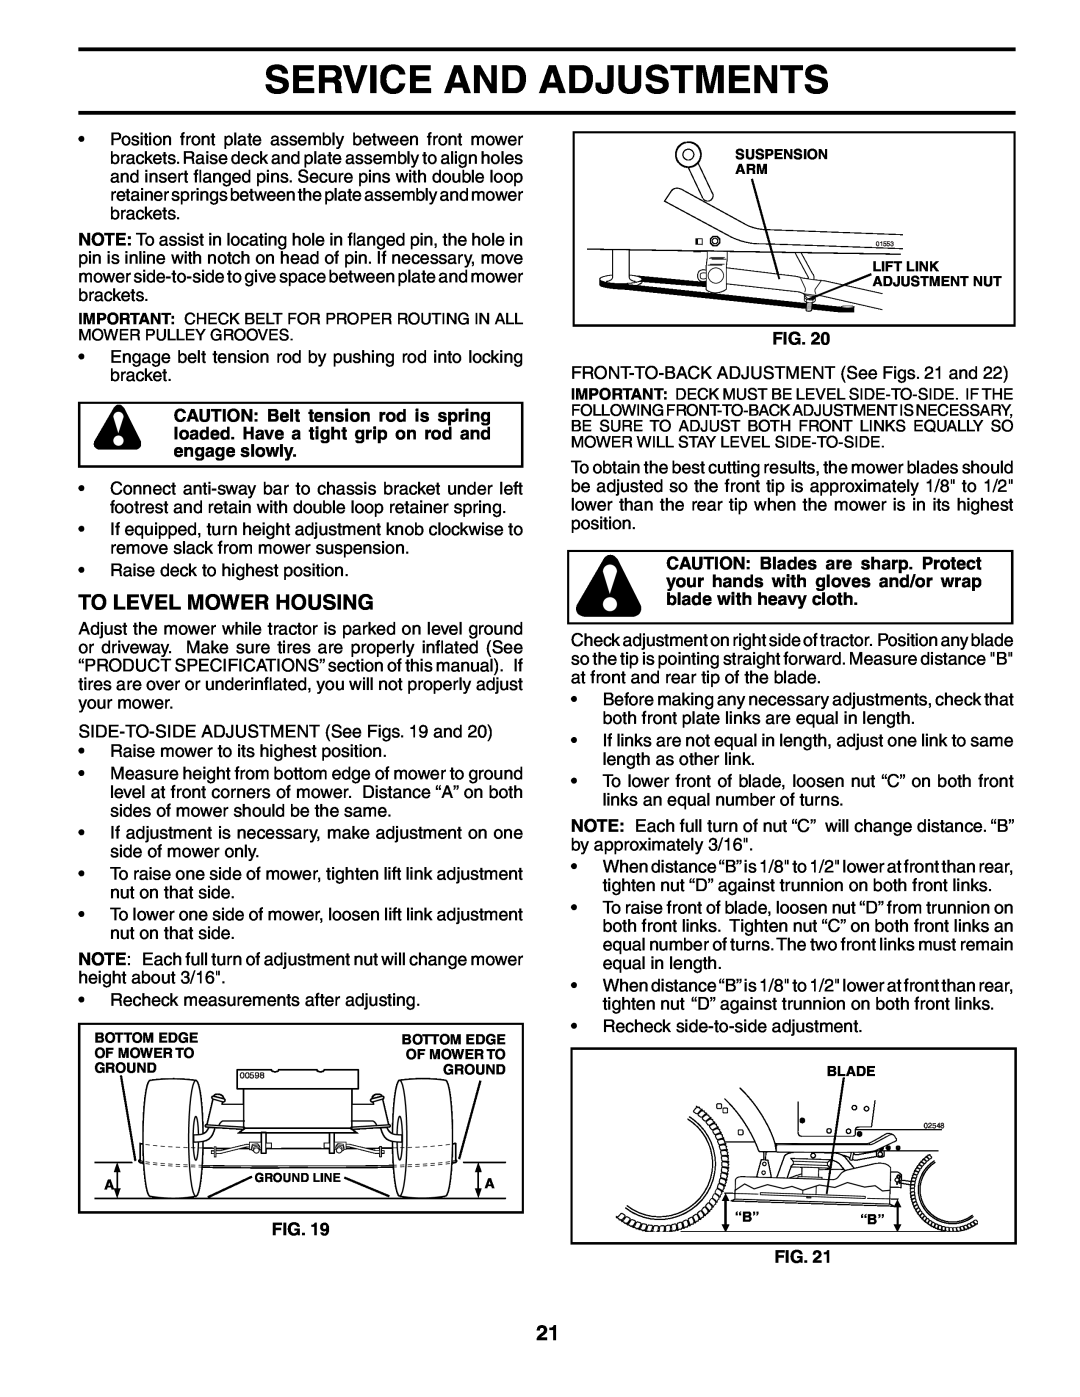 Poulan 195032 manual To Level Mower Housing, Service And Adjustments, Ground Line 